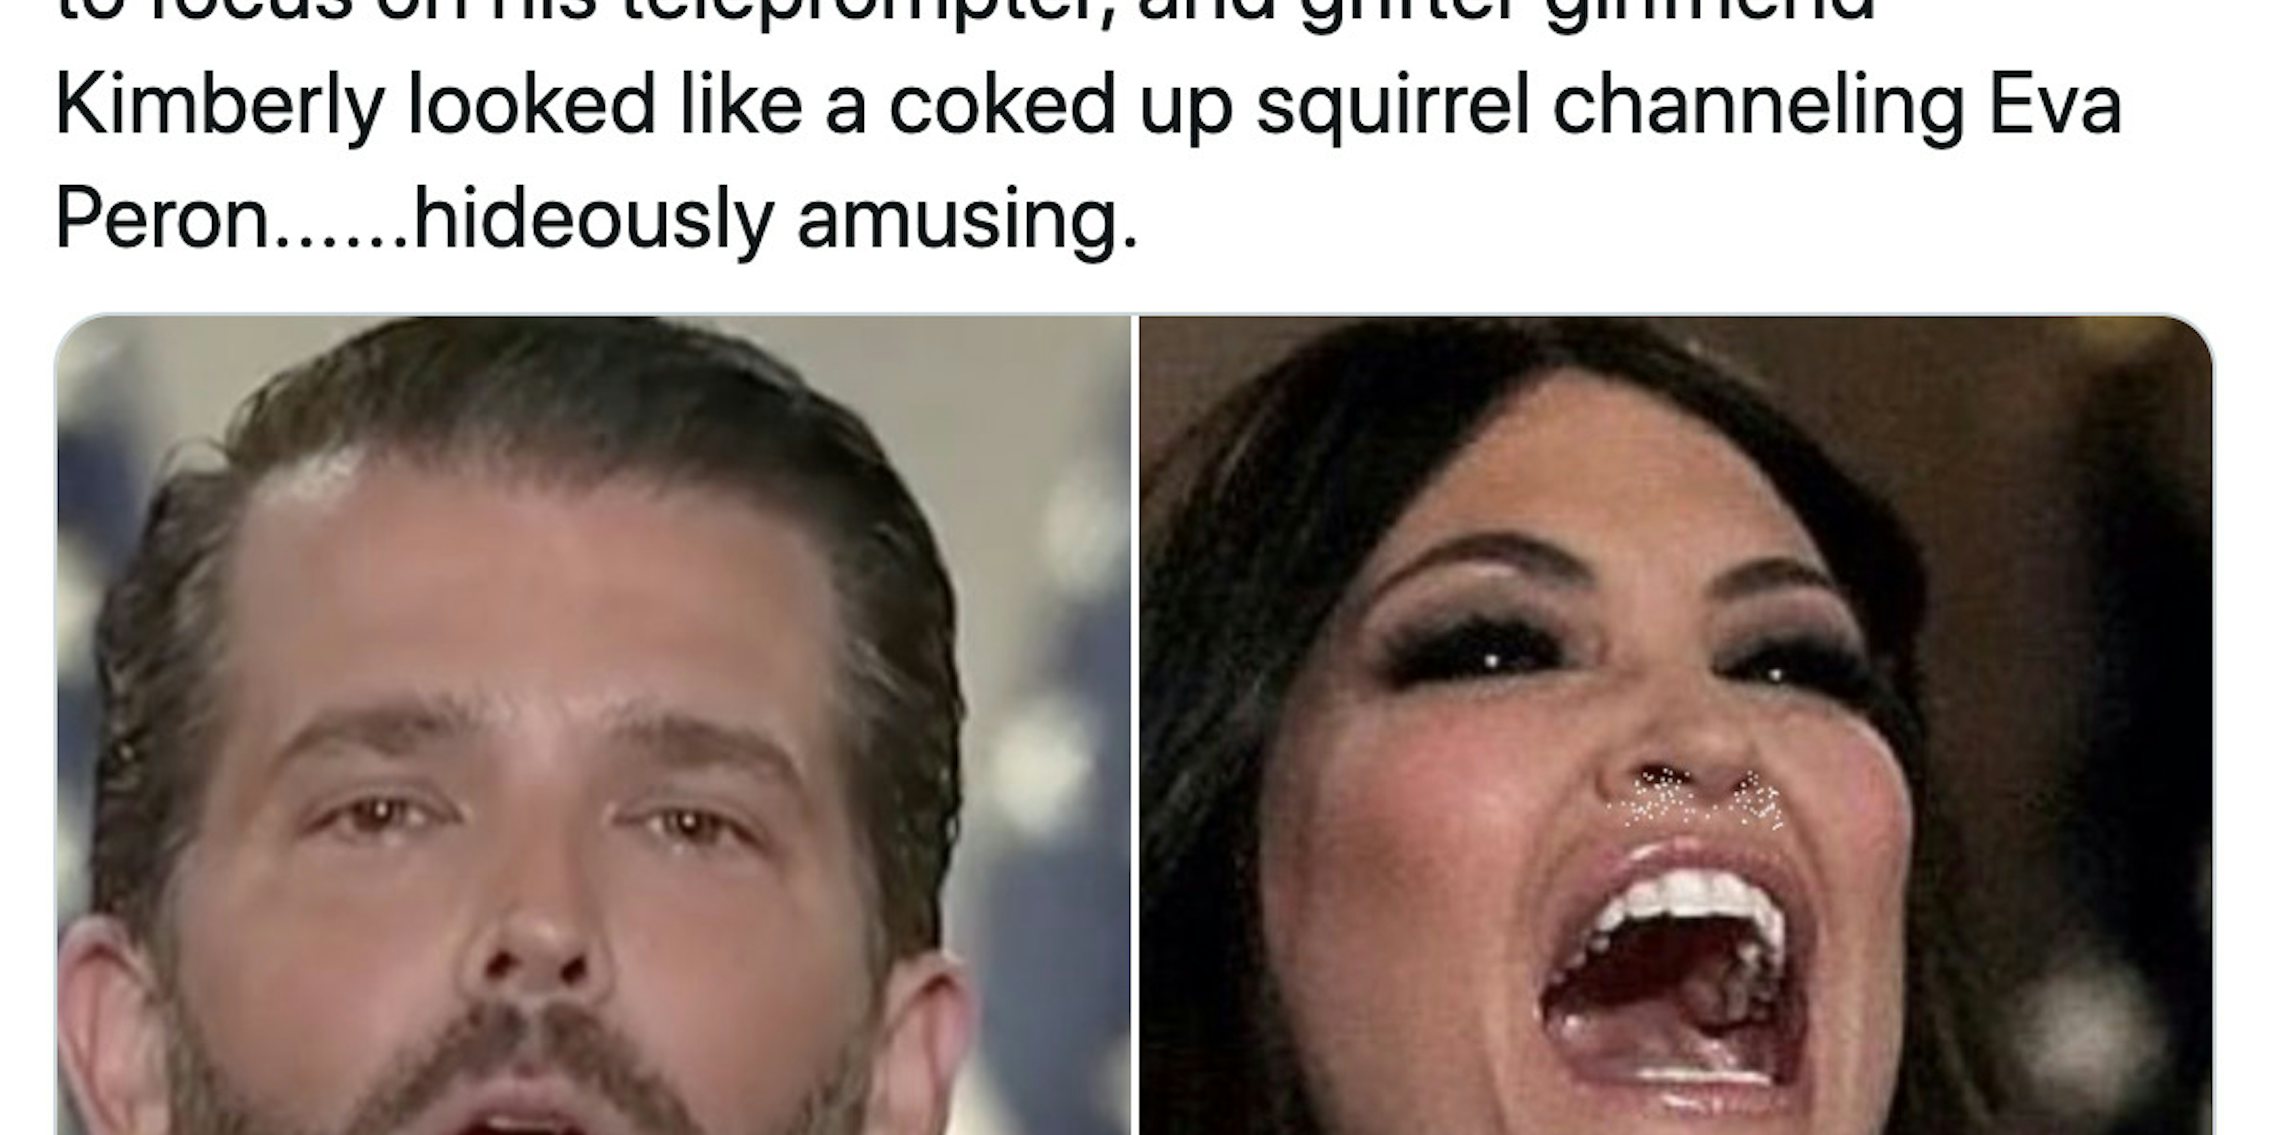 'Looked like Don Jr. got into daddy’s Adderall before trying to focus on his teleprompter, and grifter girlfriend Kimberly looked like a coked up squirrel channeling Eva Peron......hideously amusing.' stills of both speakers from the convention with some obvious editing on Guillfoyle to make it look like there's cocaine around her nose